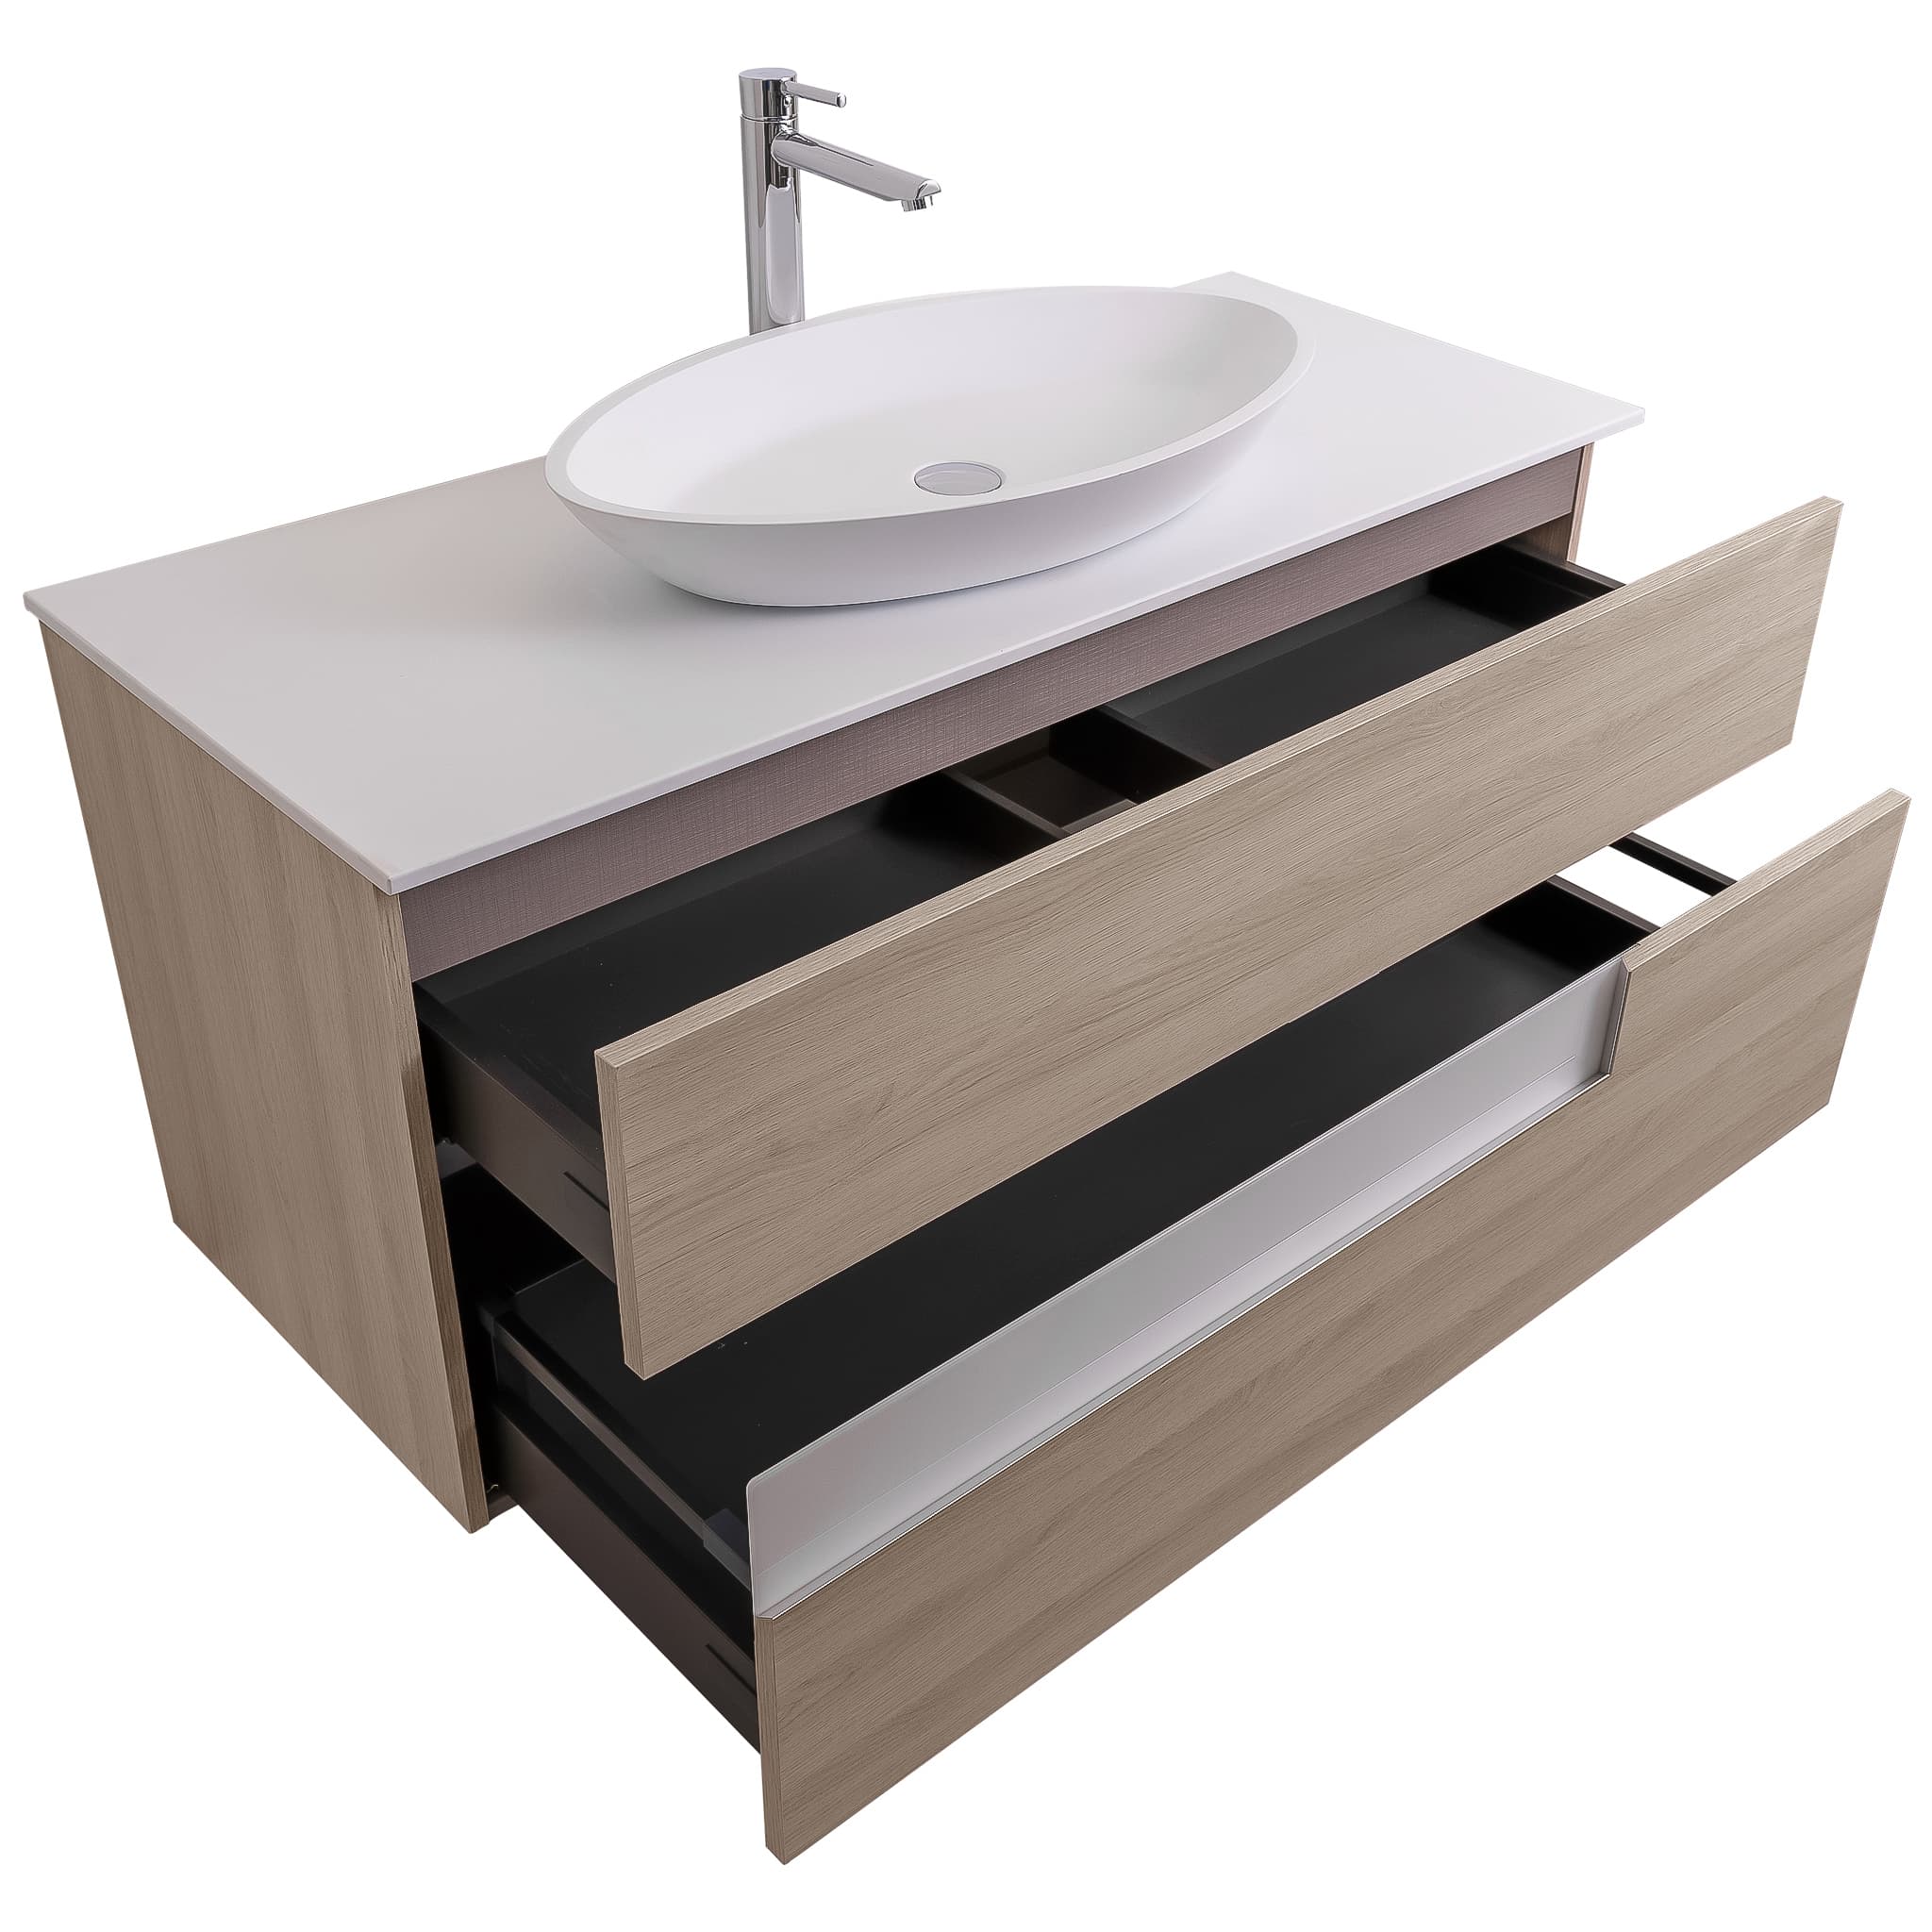 Vision 47.5 Natural Light Wood Cabinet, Solid Surface Flat White Counter And Oval Solid Surface White Basin 1305, Wall Mounted Modern Vanity Set